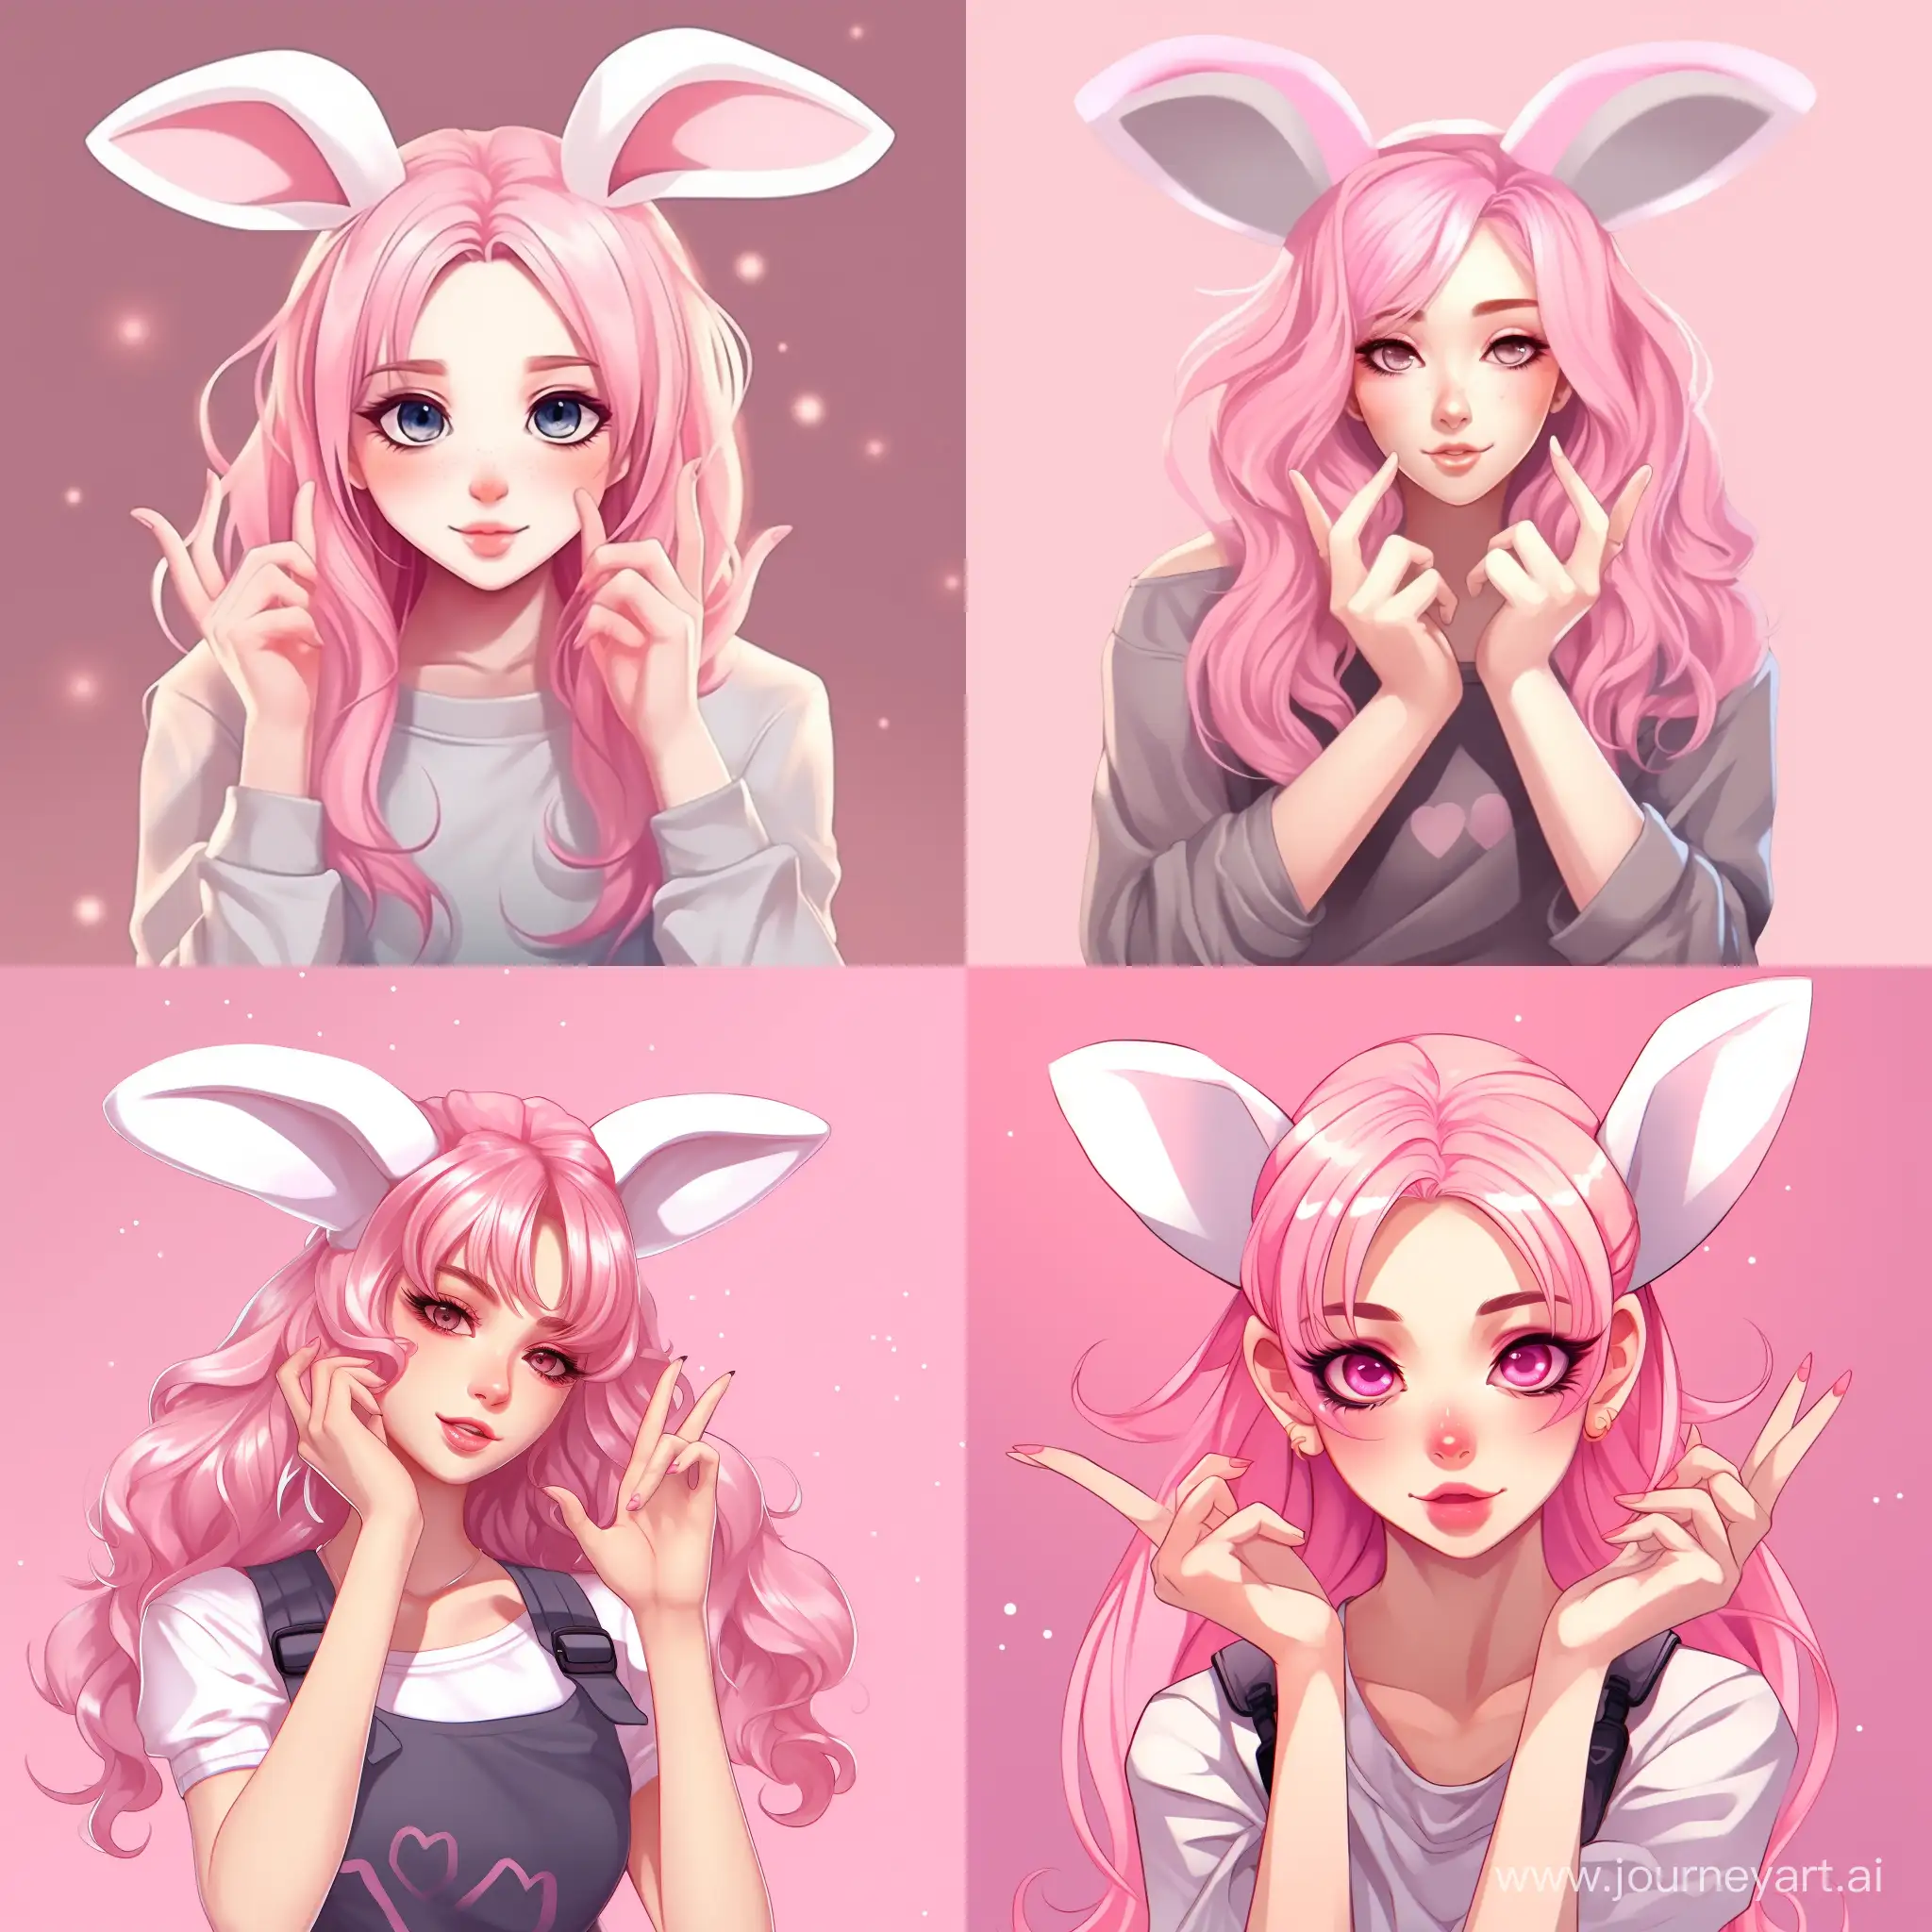 digital art of girl with pink hair, bend with bunny ears on her head, winks, makes a heart gesture with his fingers, in pink pastel colors, cute cartoon style